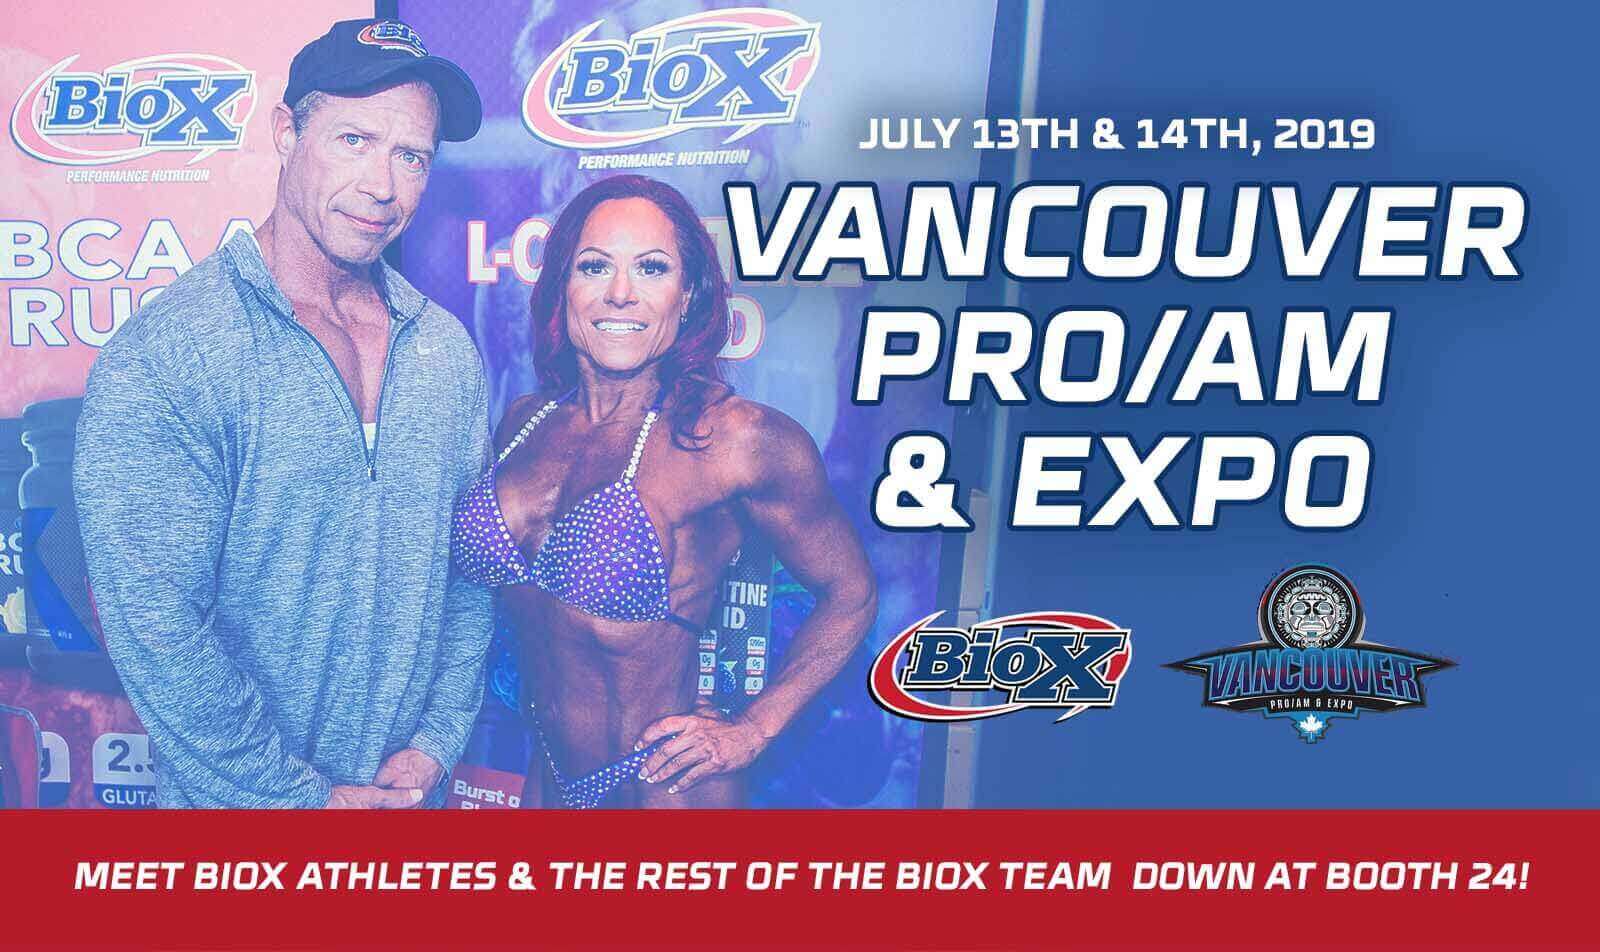 BioX at The Vancouver Pro/Am & Expo This Weekend!